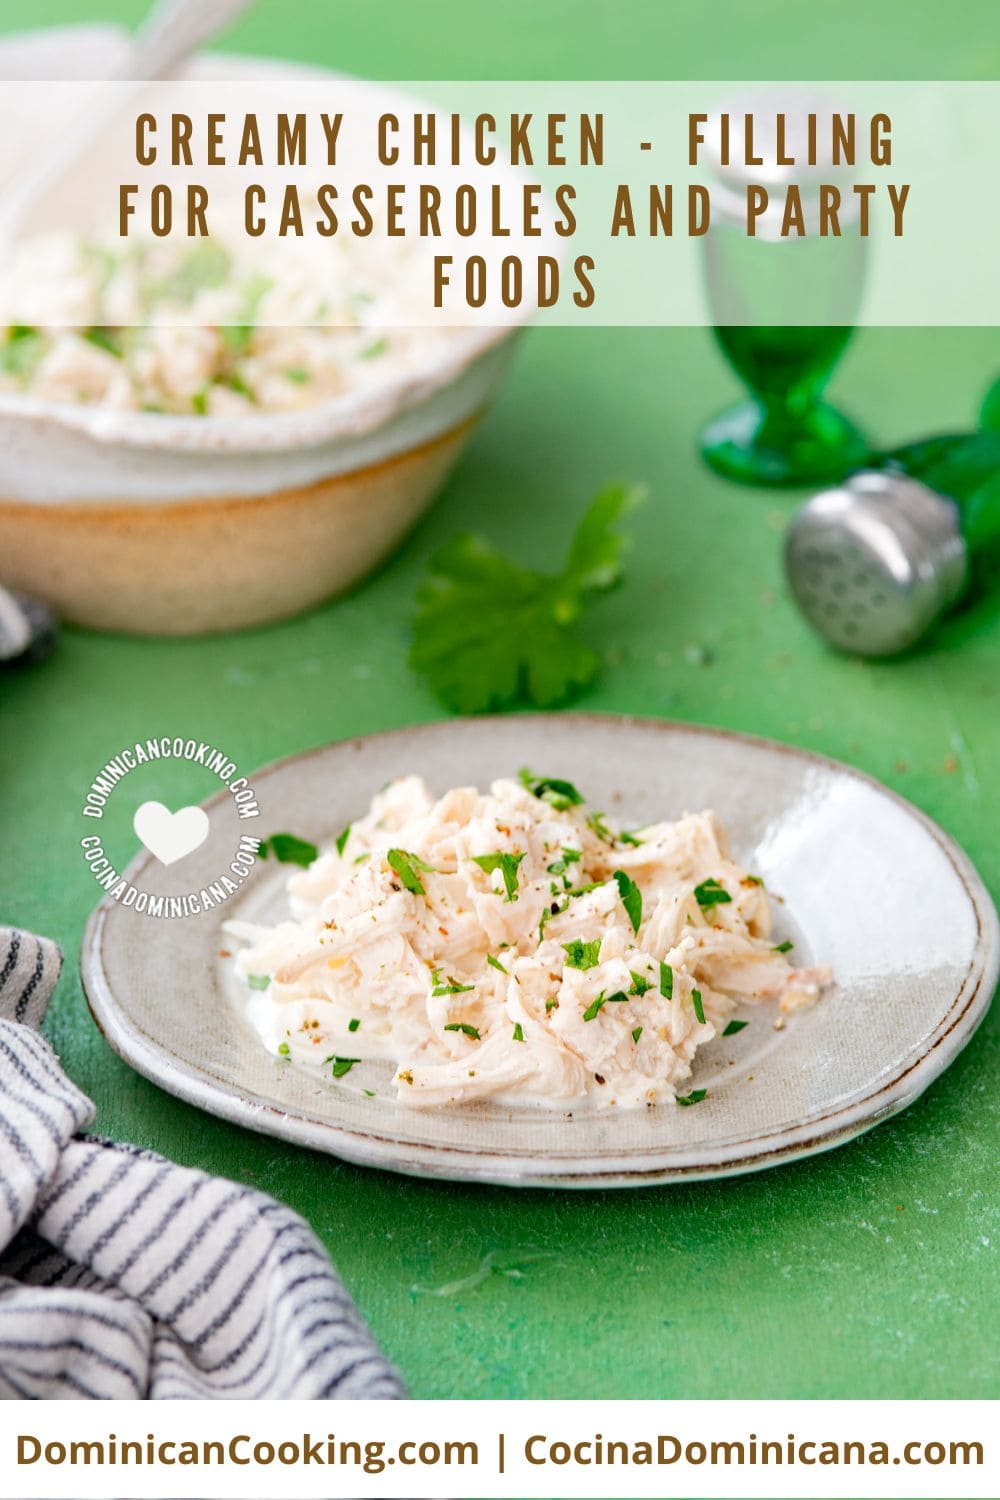 Creamy chicken - filling for casseroles and party foods.